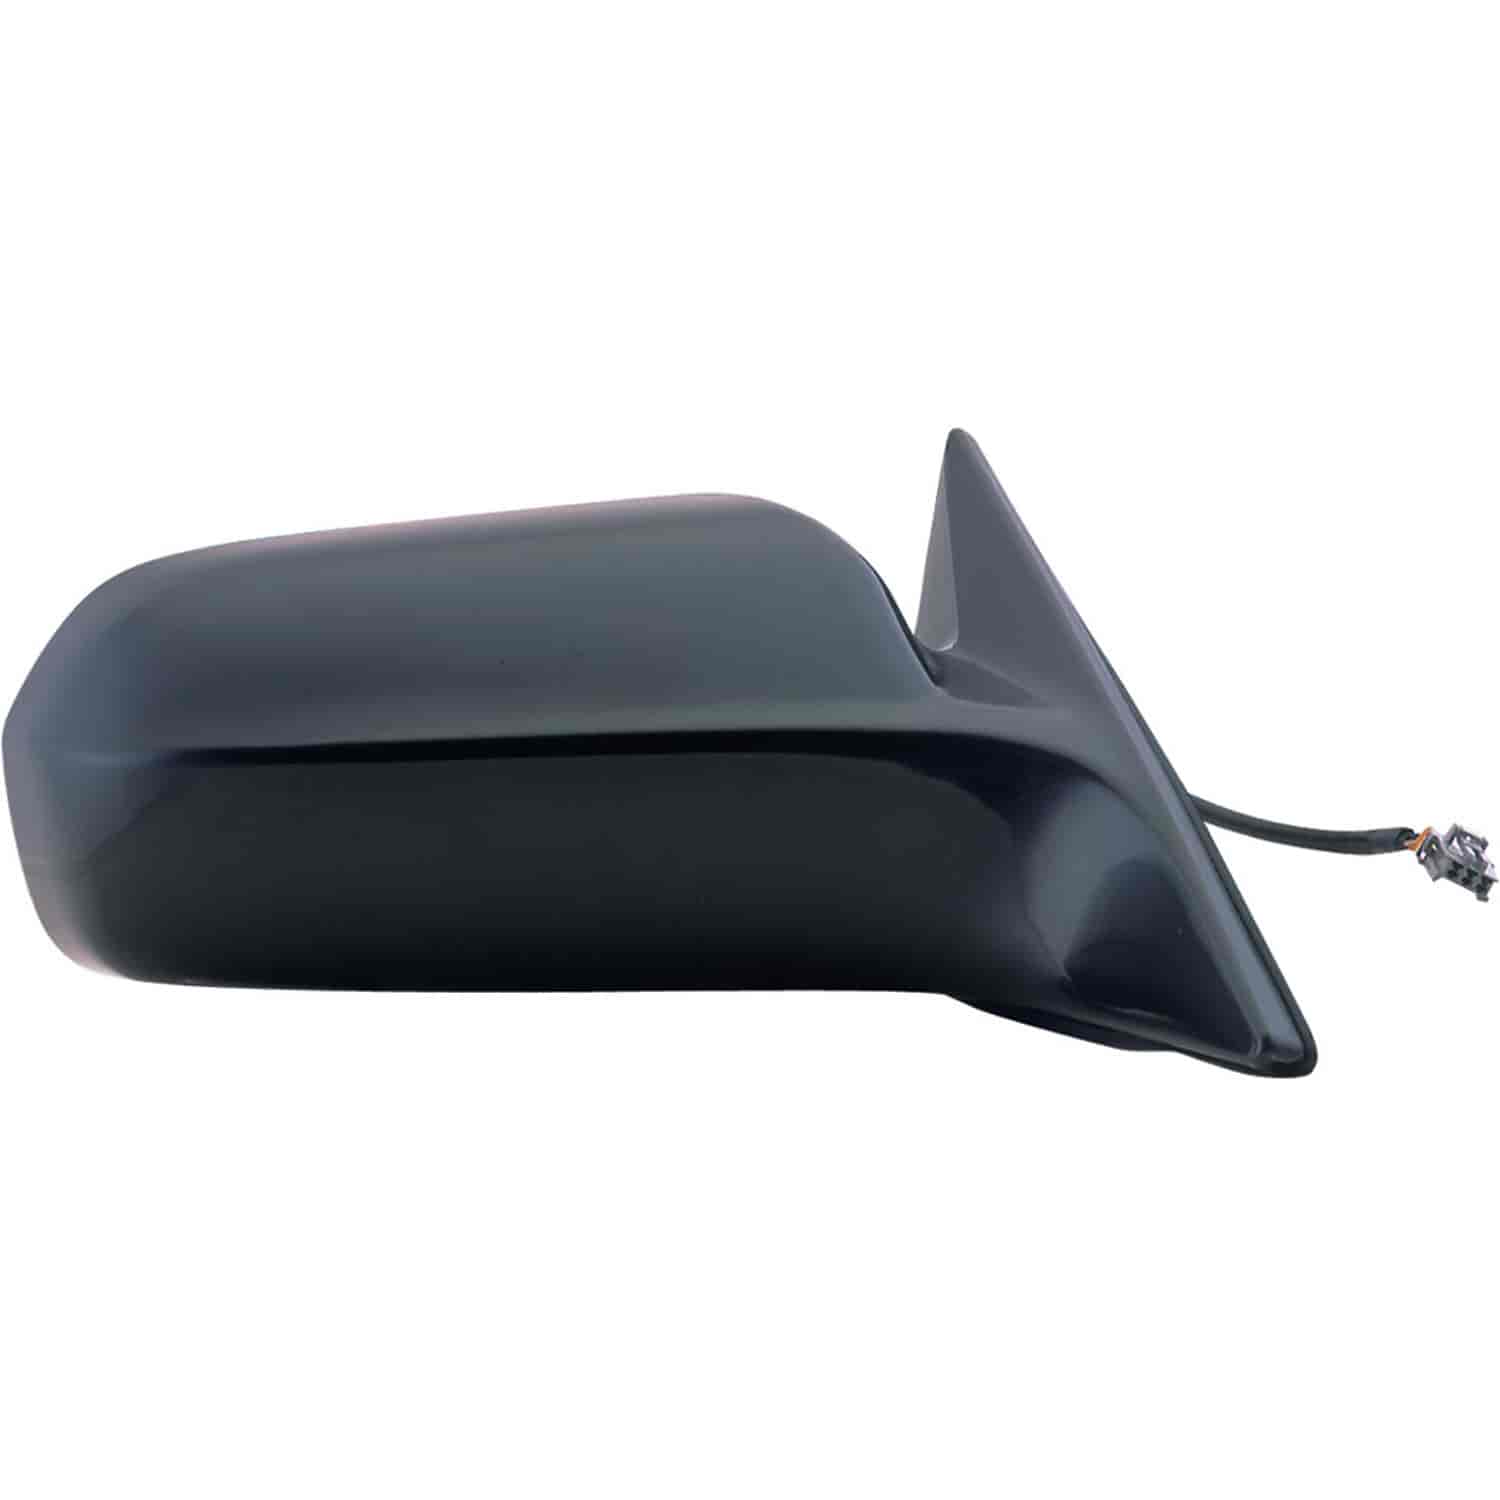 OEM Style Replacement mirror for 98 Honda Accord Coupe passenger side mirror tested to fit and funct